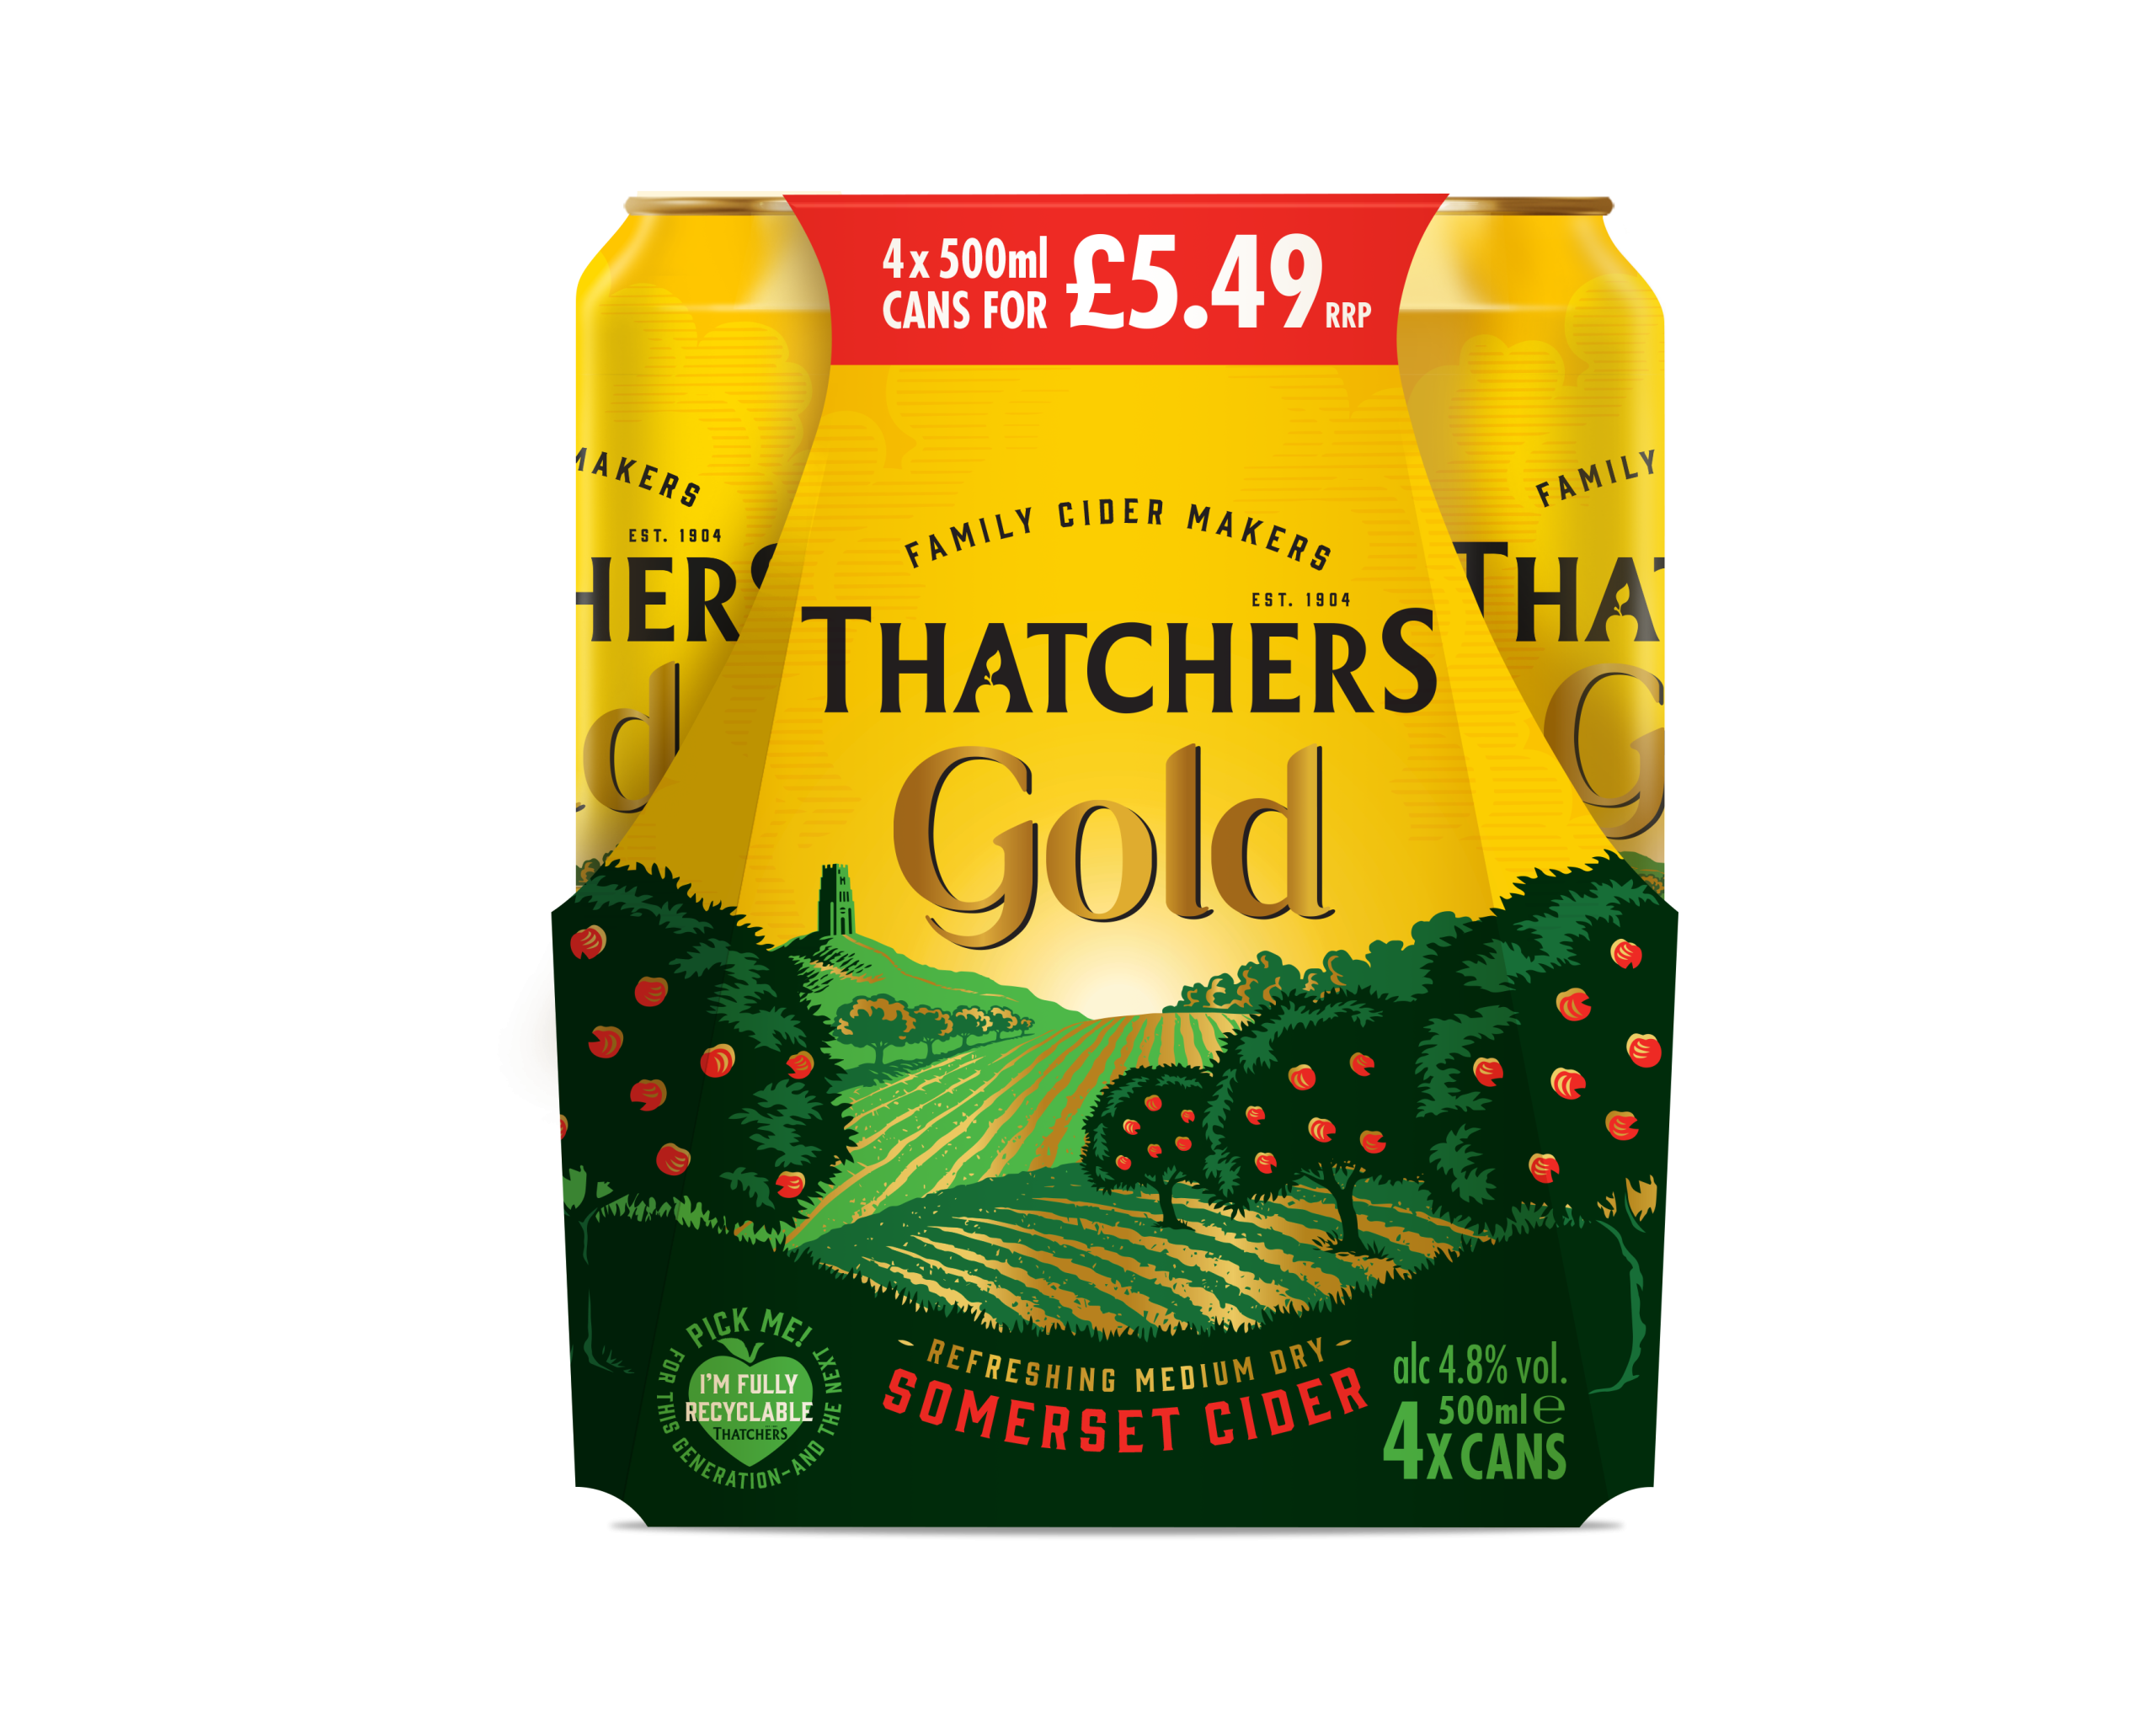 Thatchers launches new PMP for best-selling Thatchers Gold